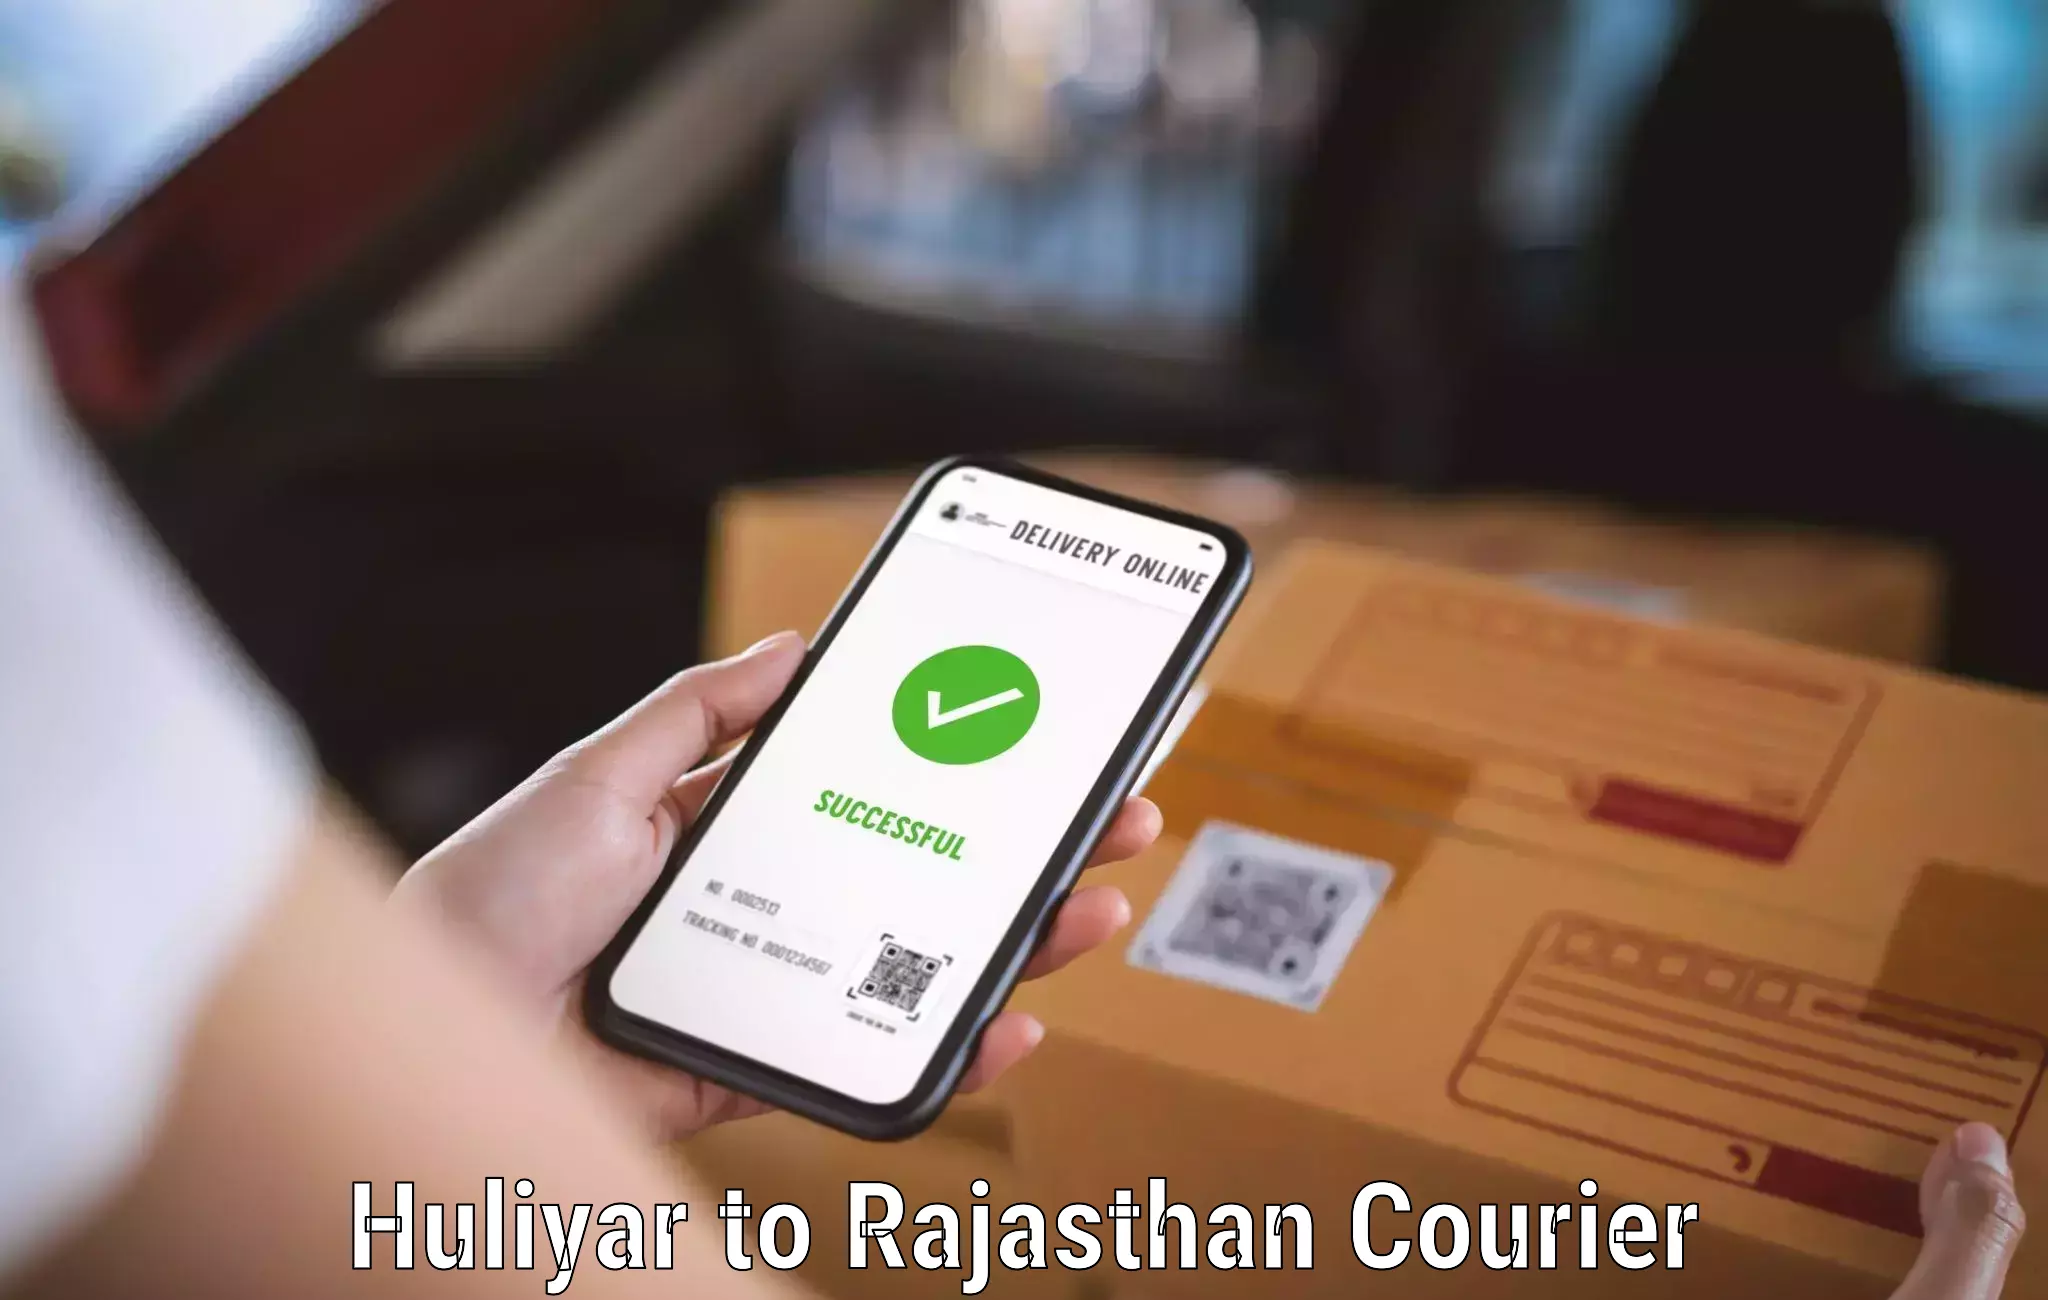 Reliable package handling Huliyar to Piparcity